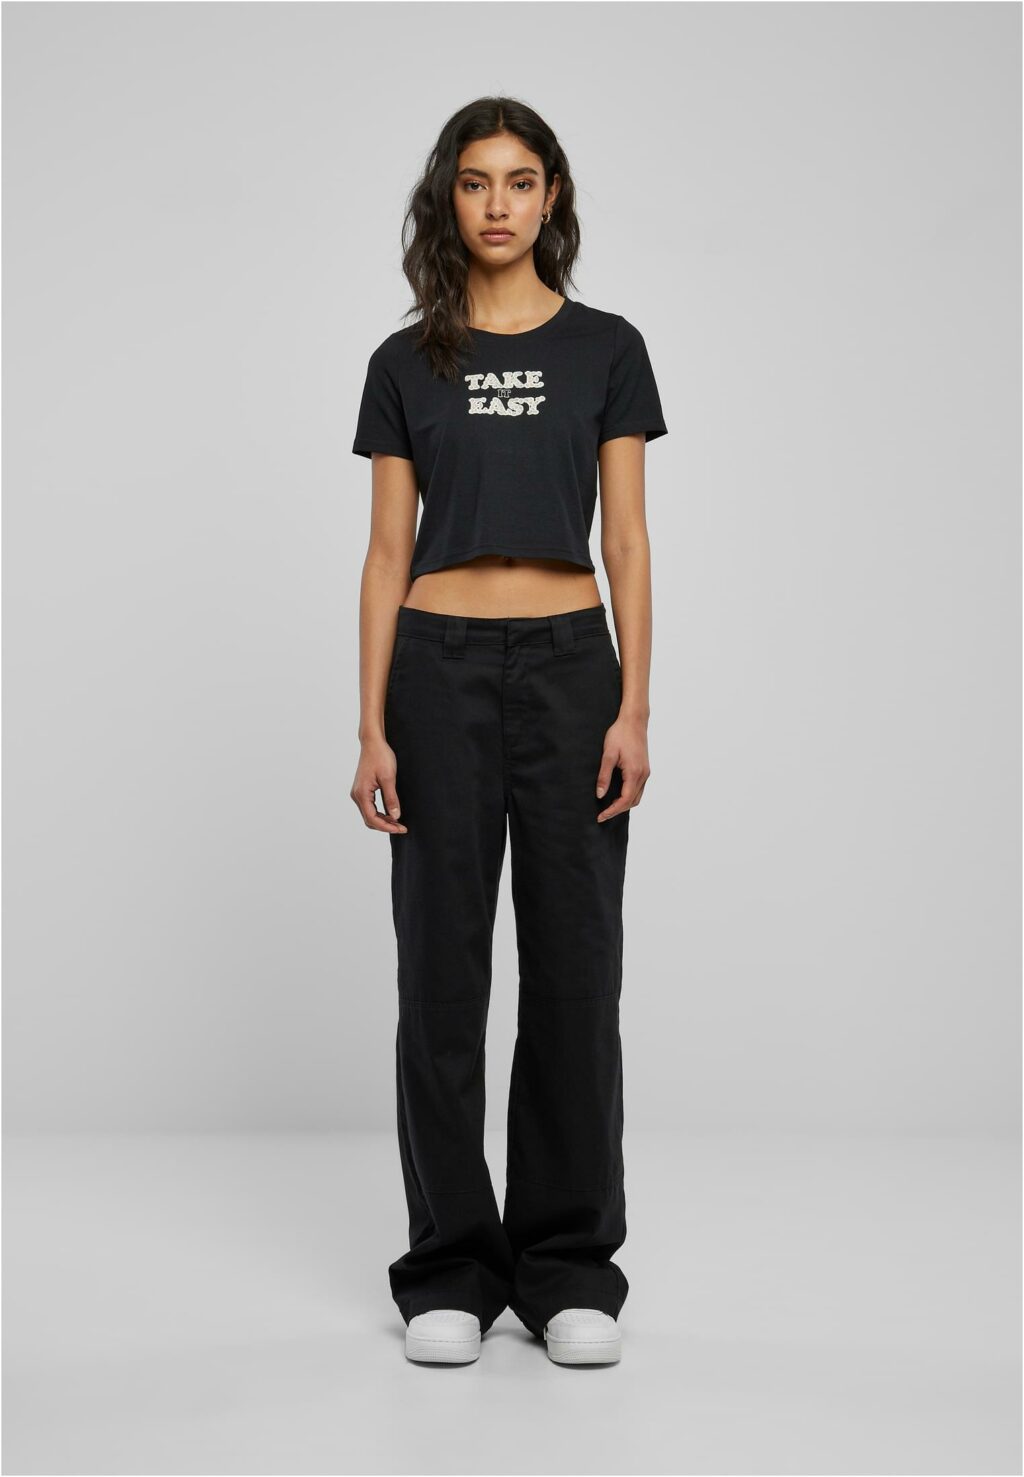 Take It Daisy Cropped Tee black BE067